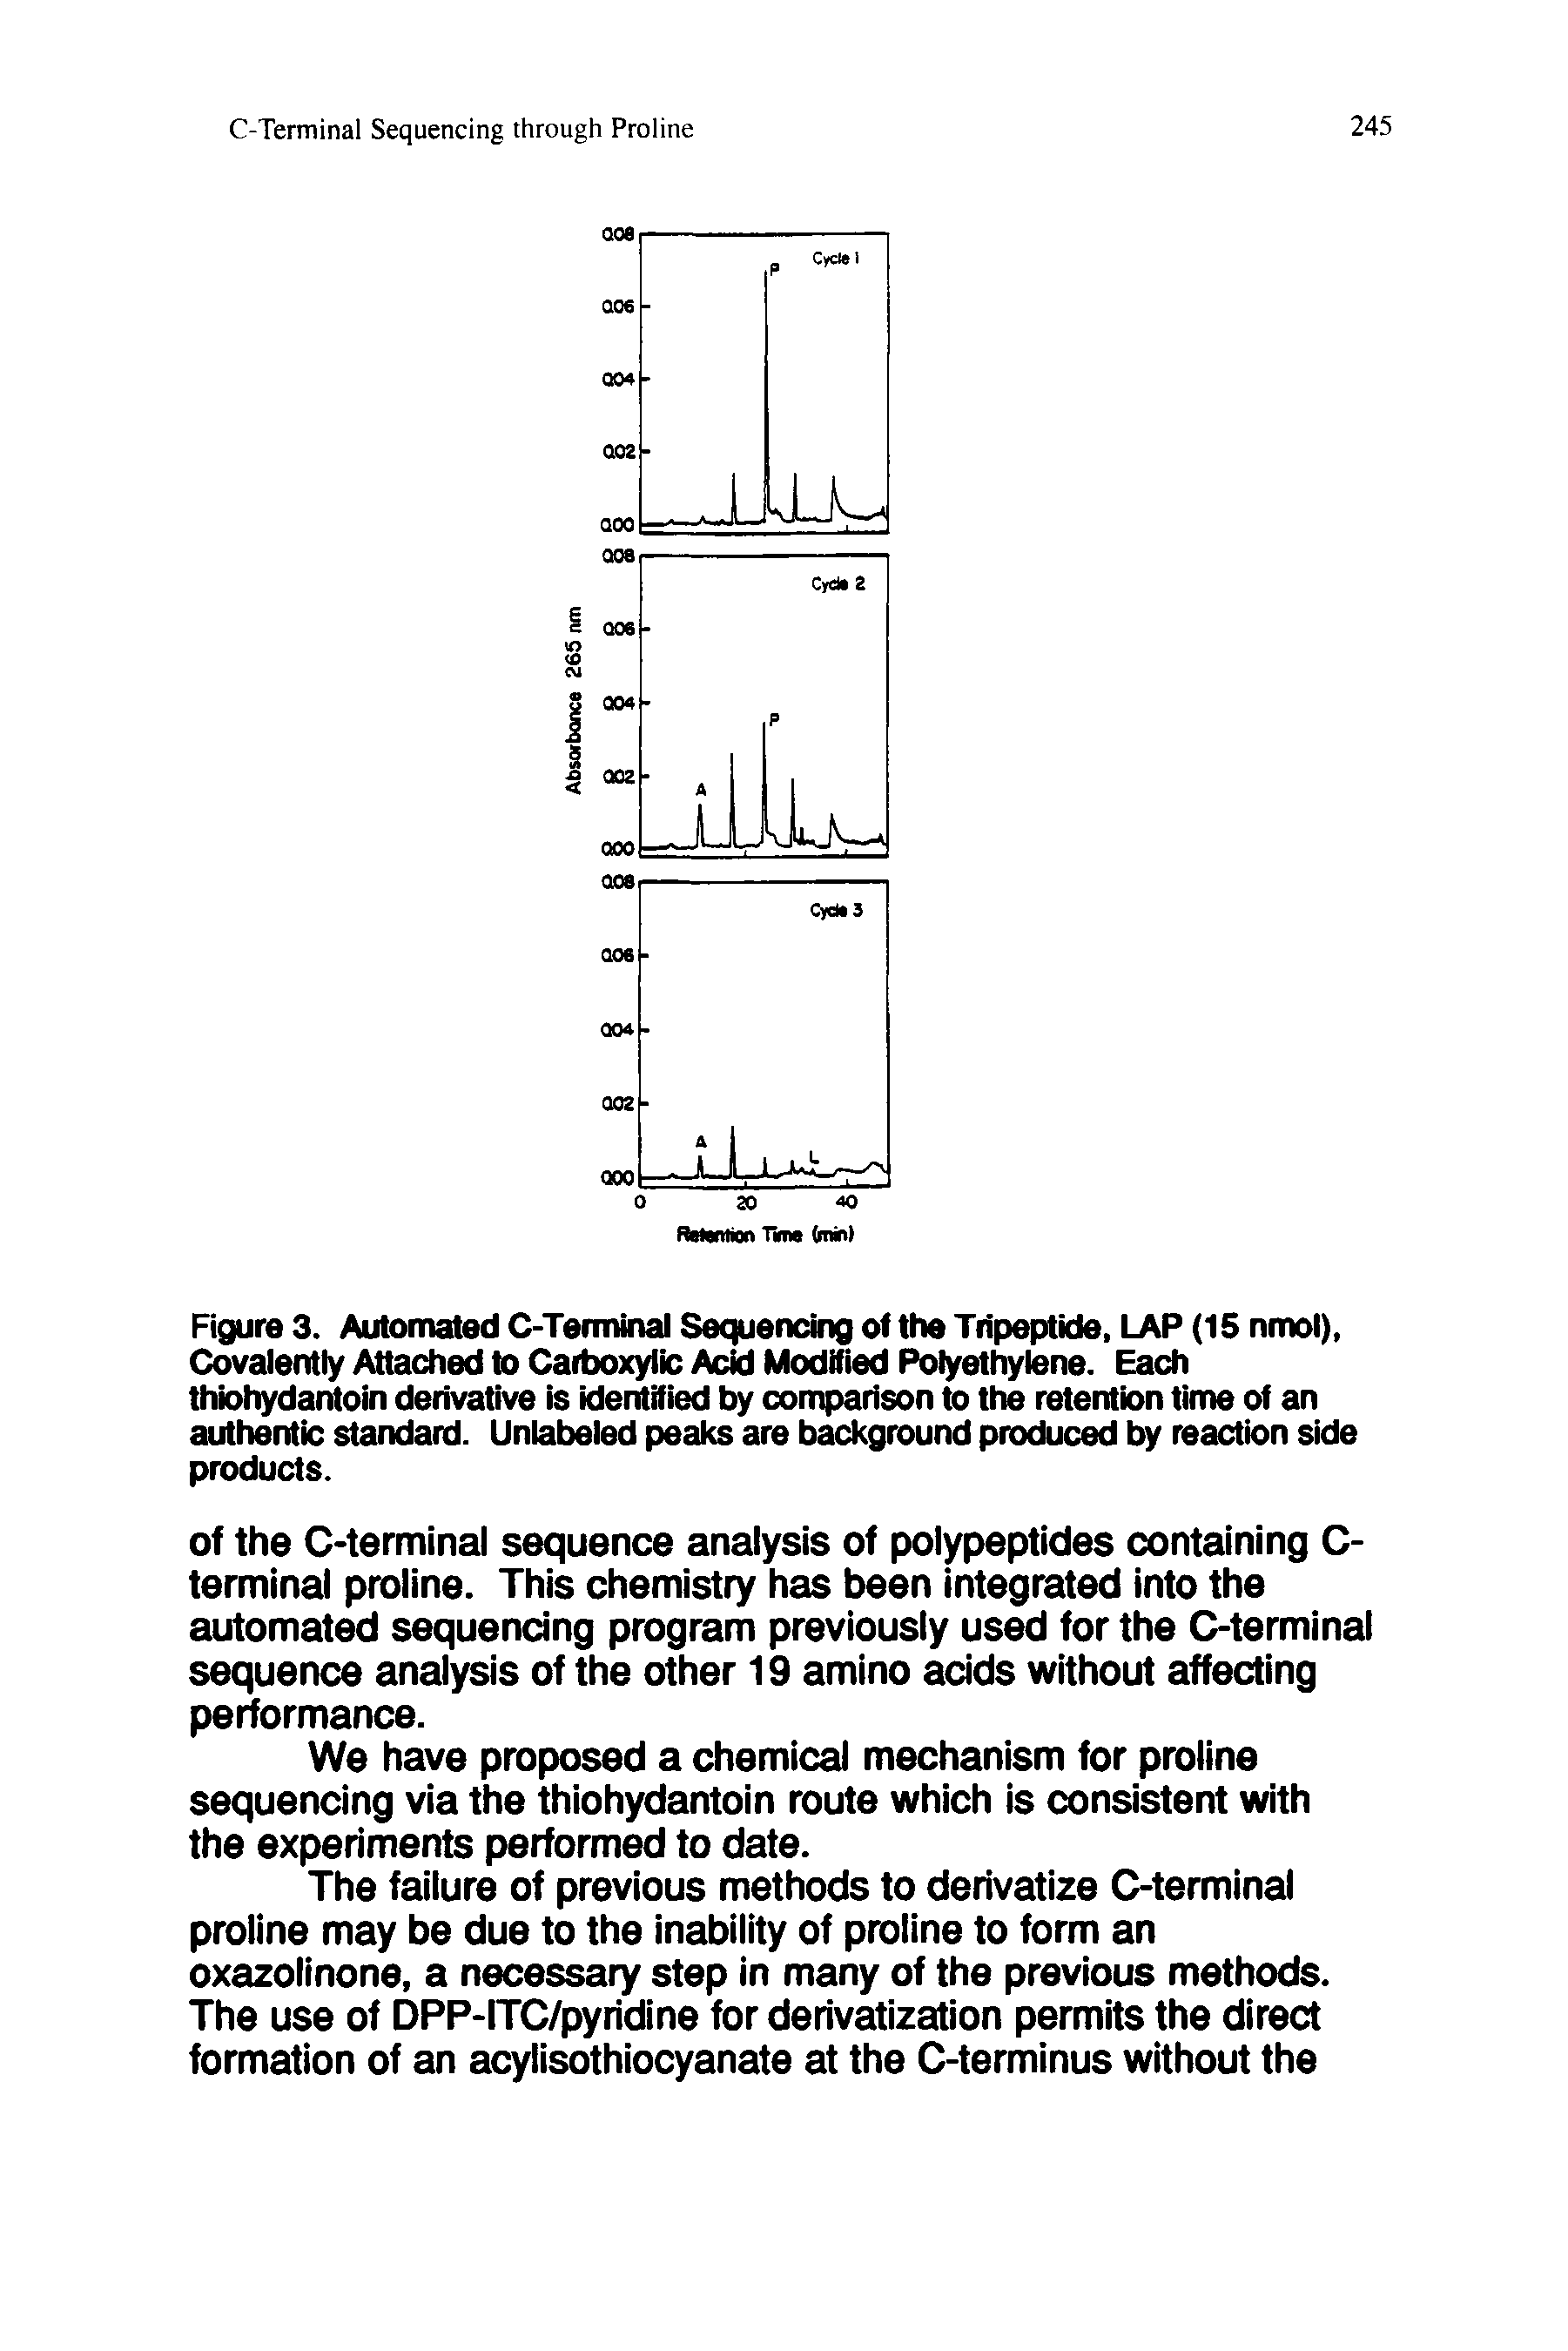 Figure 3. Automated C-Terminal Sequencing of the Tripeptide, LAP (15 nmol), Covalently Attached to Carboxylic Acid Modified Polyethylene. Each thiohydantoin derivative is identified by comparison to the retention time of an authentic standard. Unlabeled peaks are background produced by reaction side products.